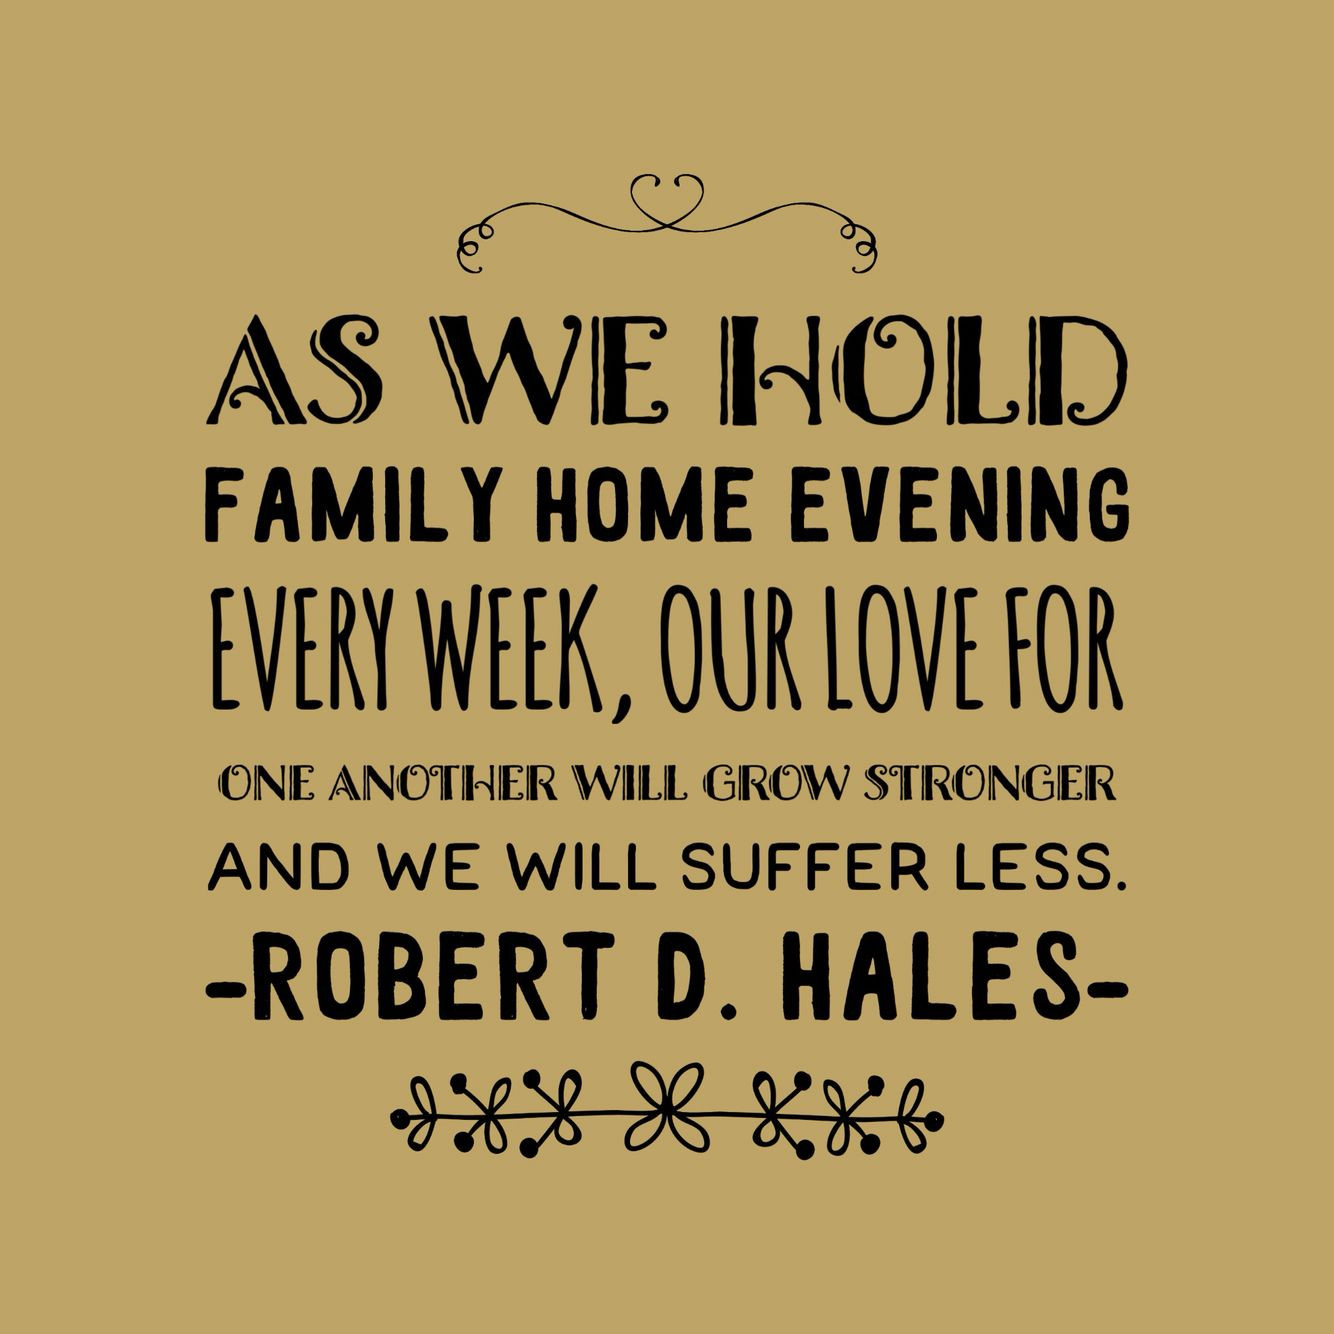 Lds Family Quotes
 Oct 2016 As we hold family home evening every week our